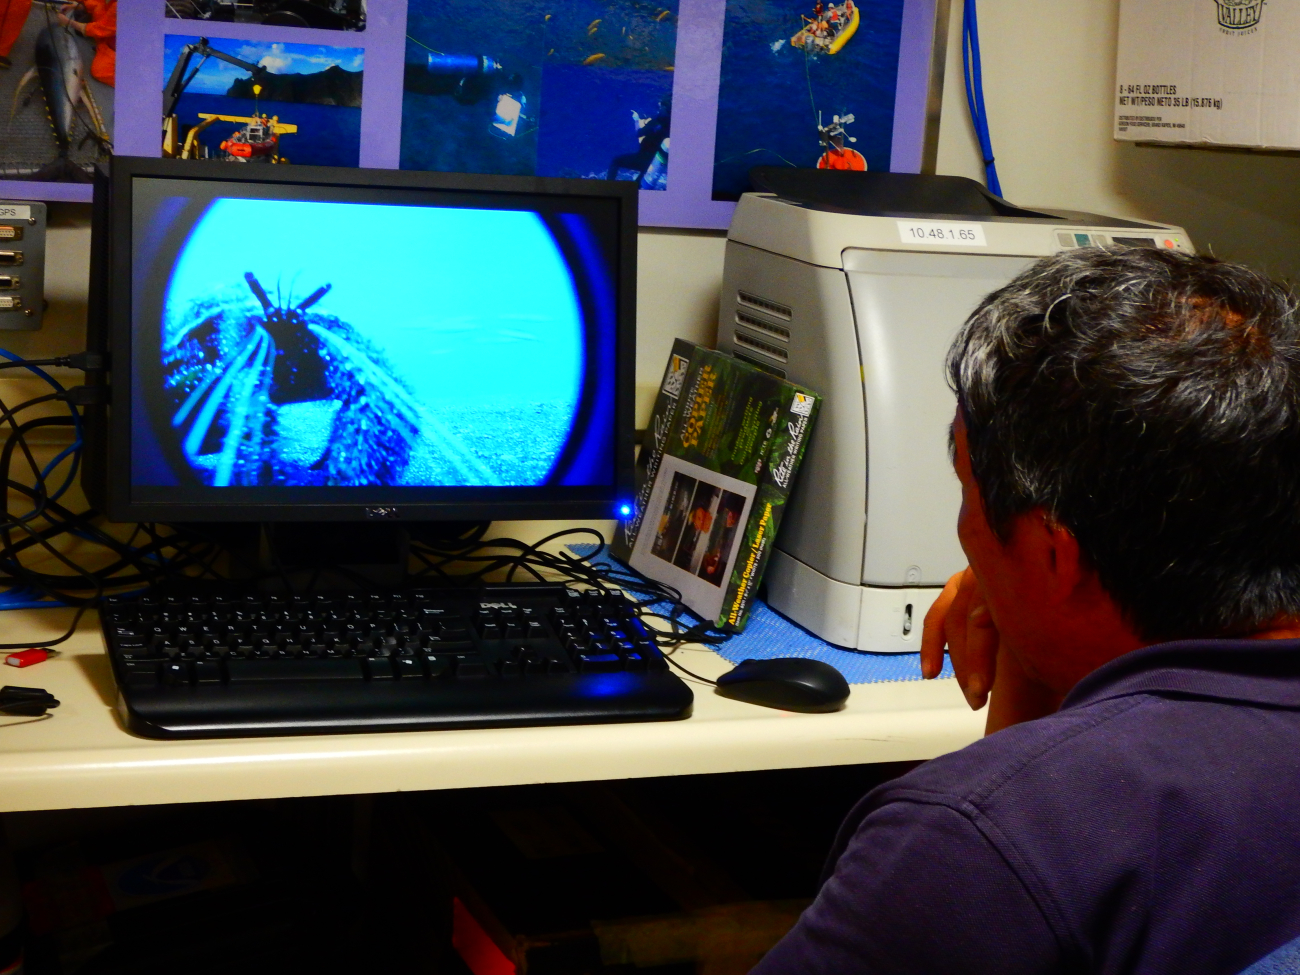 Reviewing HD movie capture from Large Fish Trap (hermit crab)